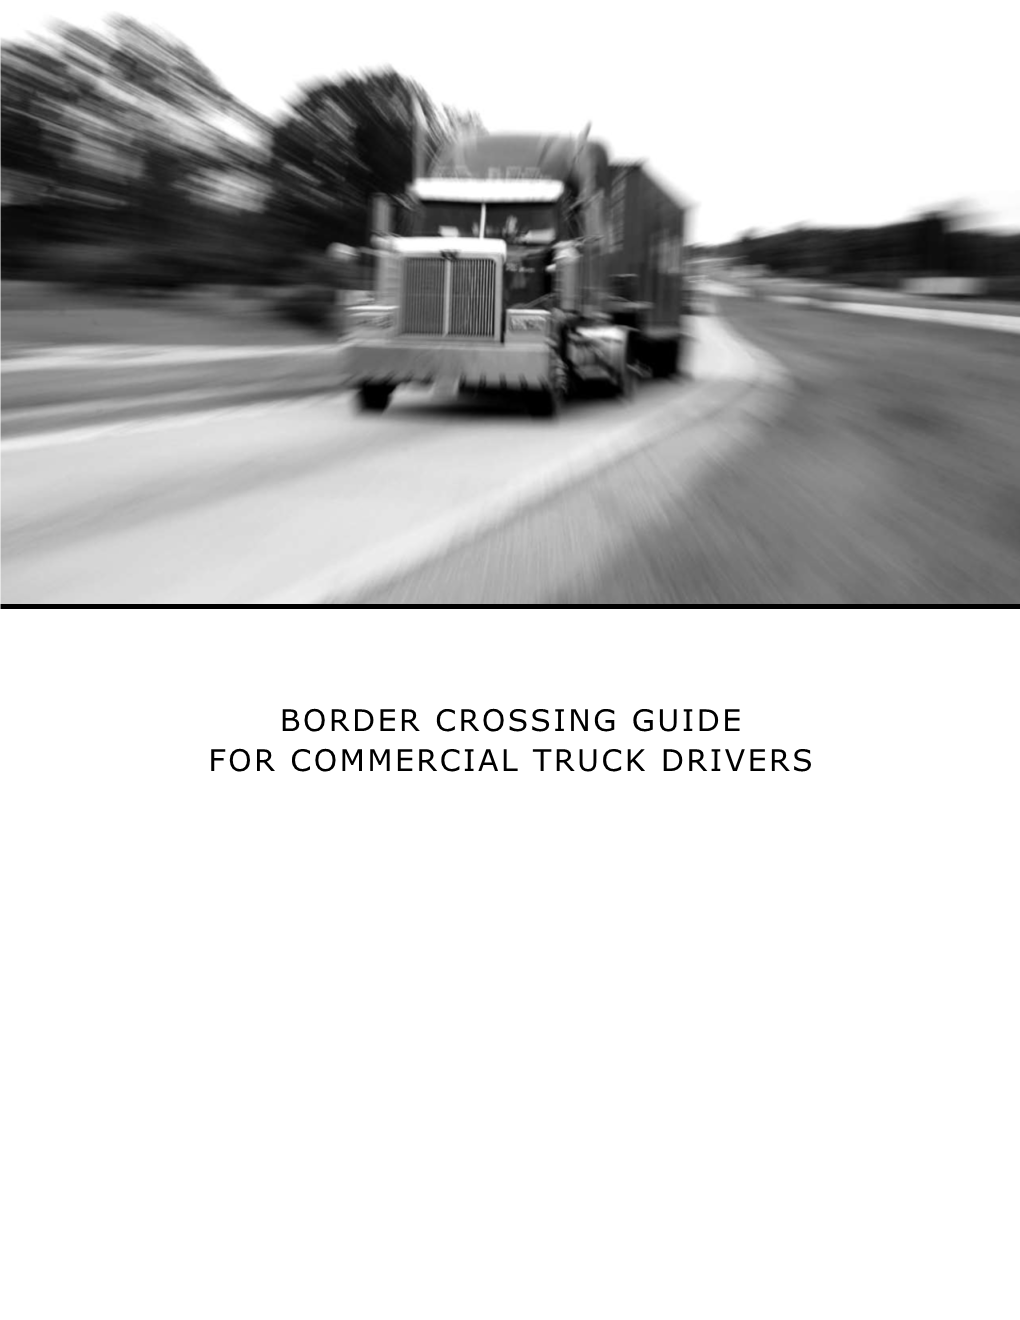 Border Crossing Guide for Commercial Truck Drivers Border Crossing Guide for Commercial Truck Drivers